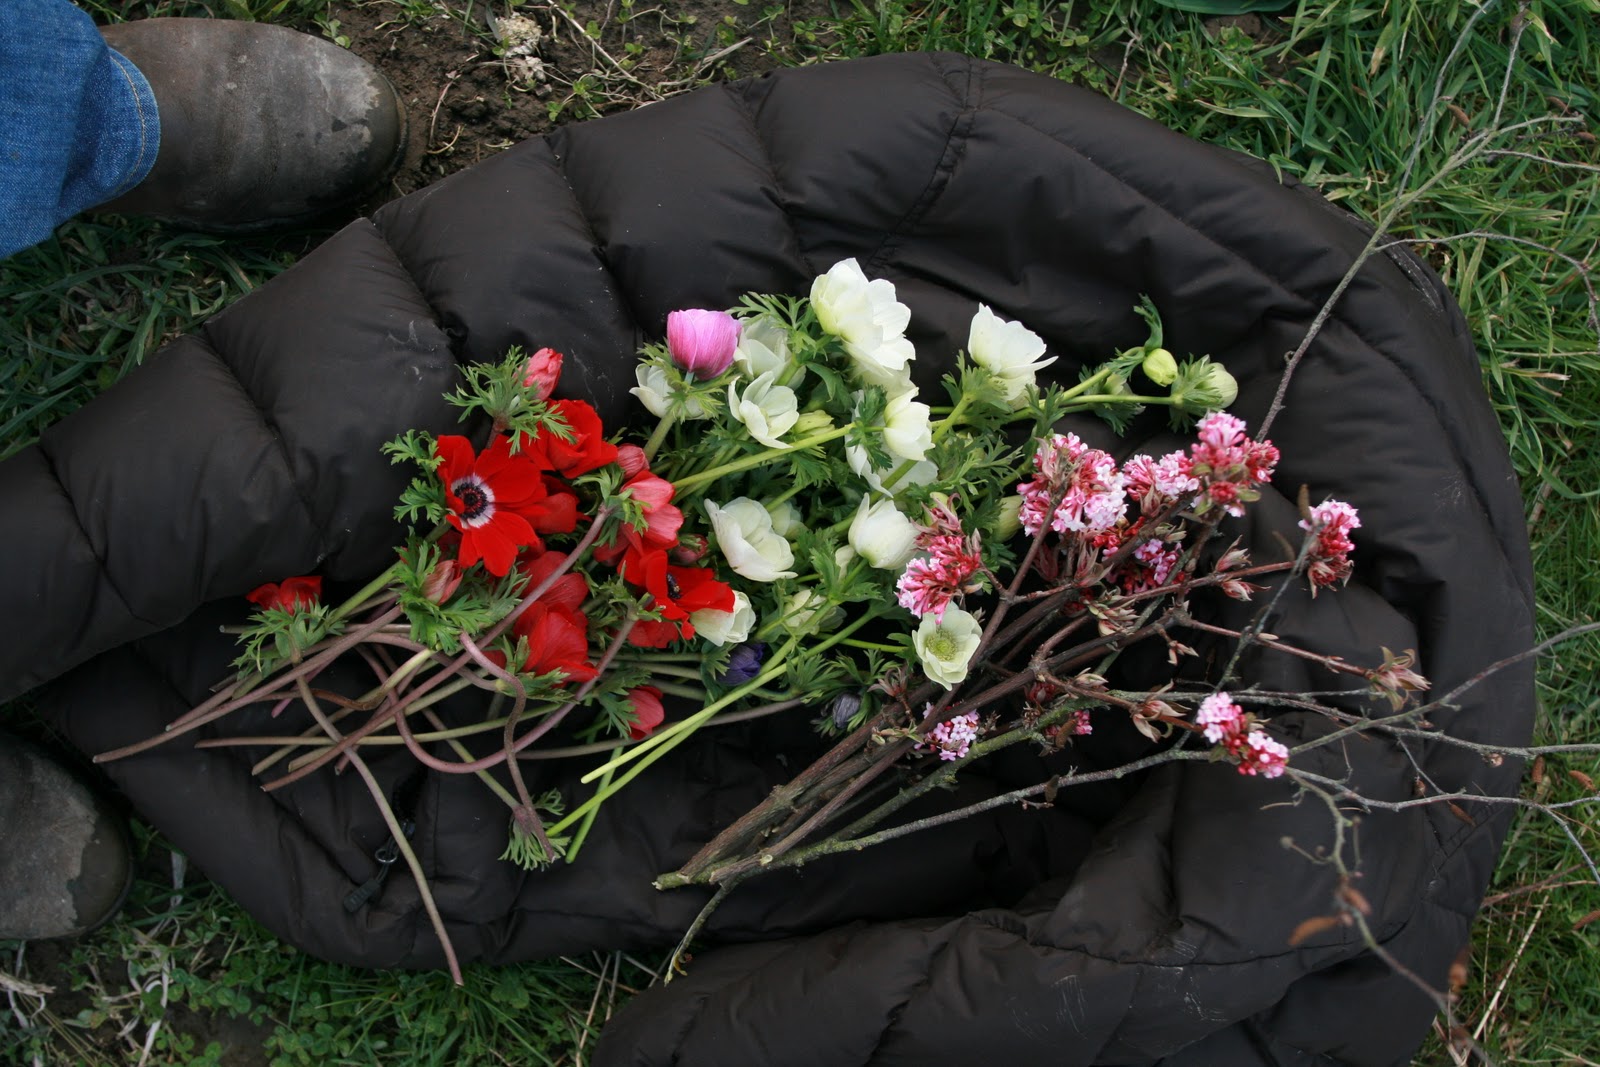 Flowers laid out on a coat